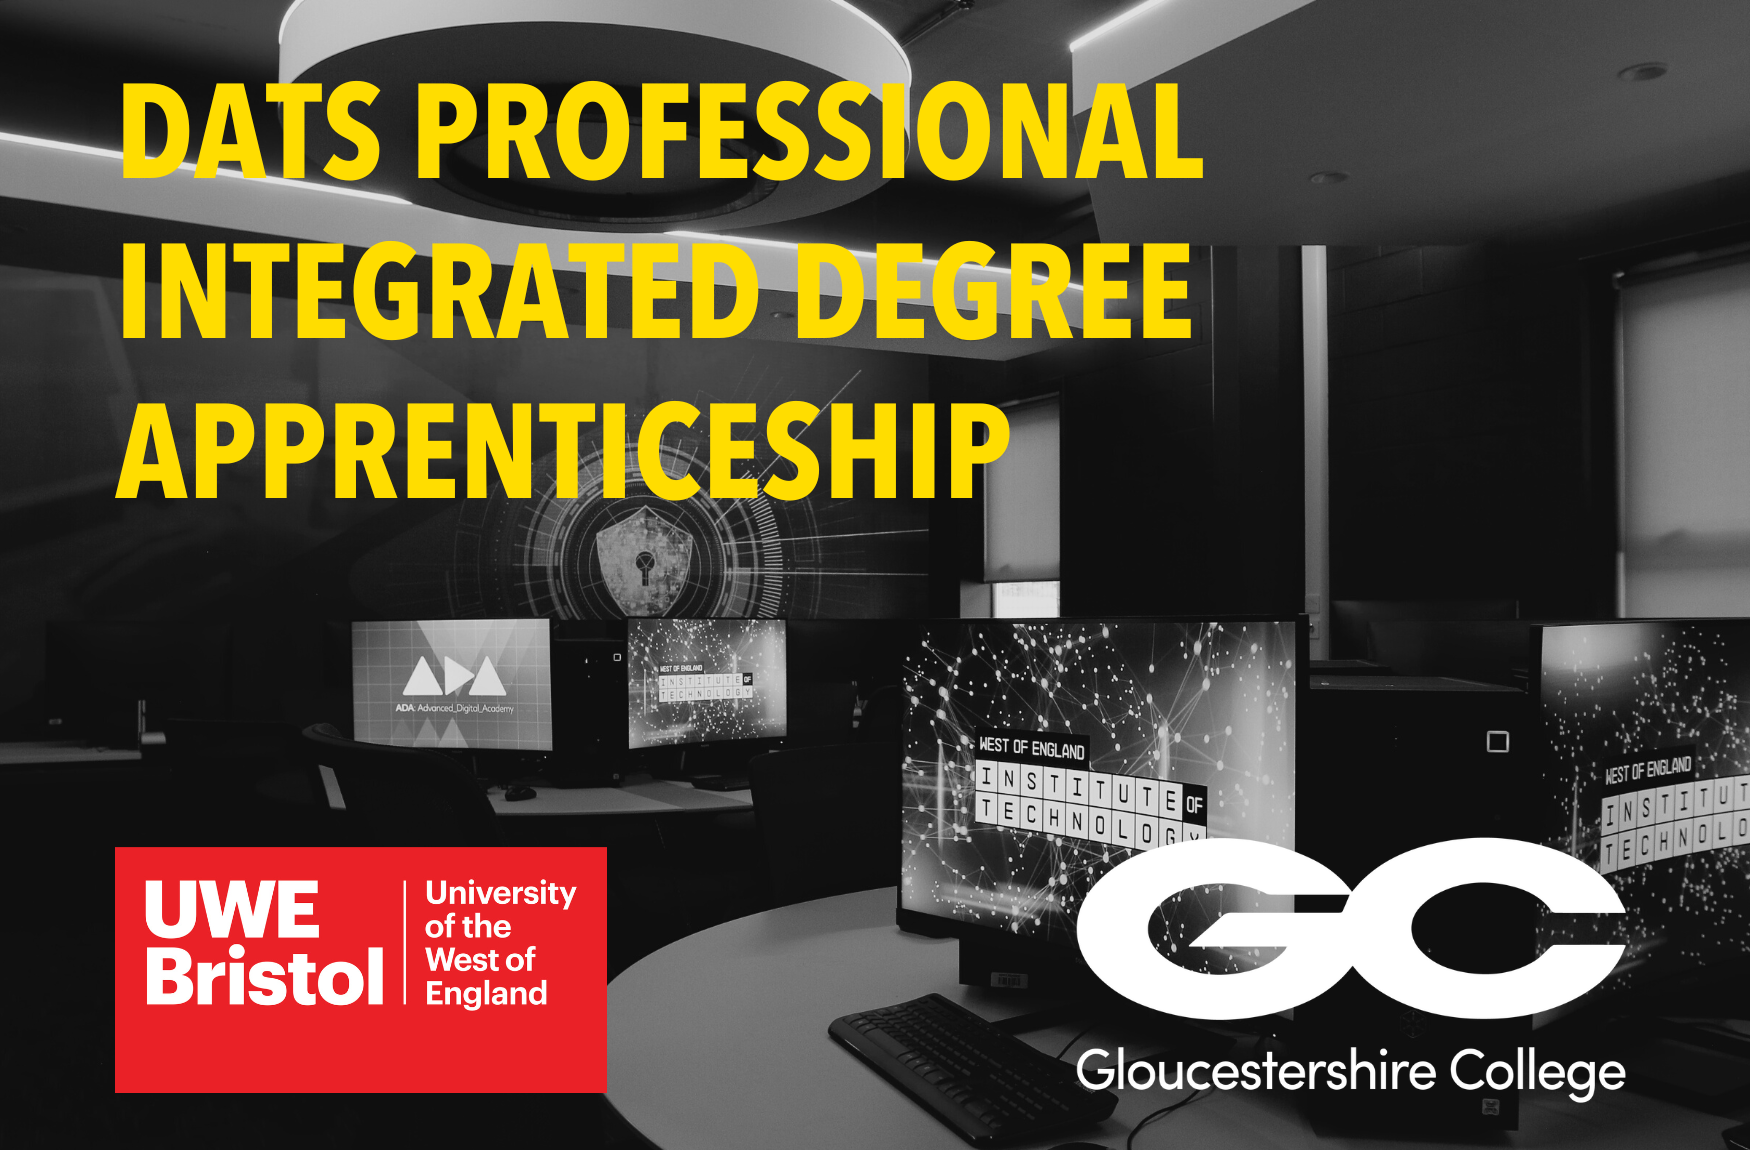 Introducing Digital and Technology Solutions Professional Integrated Degree Apprenticeship